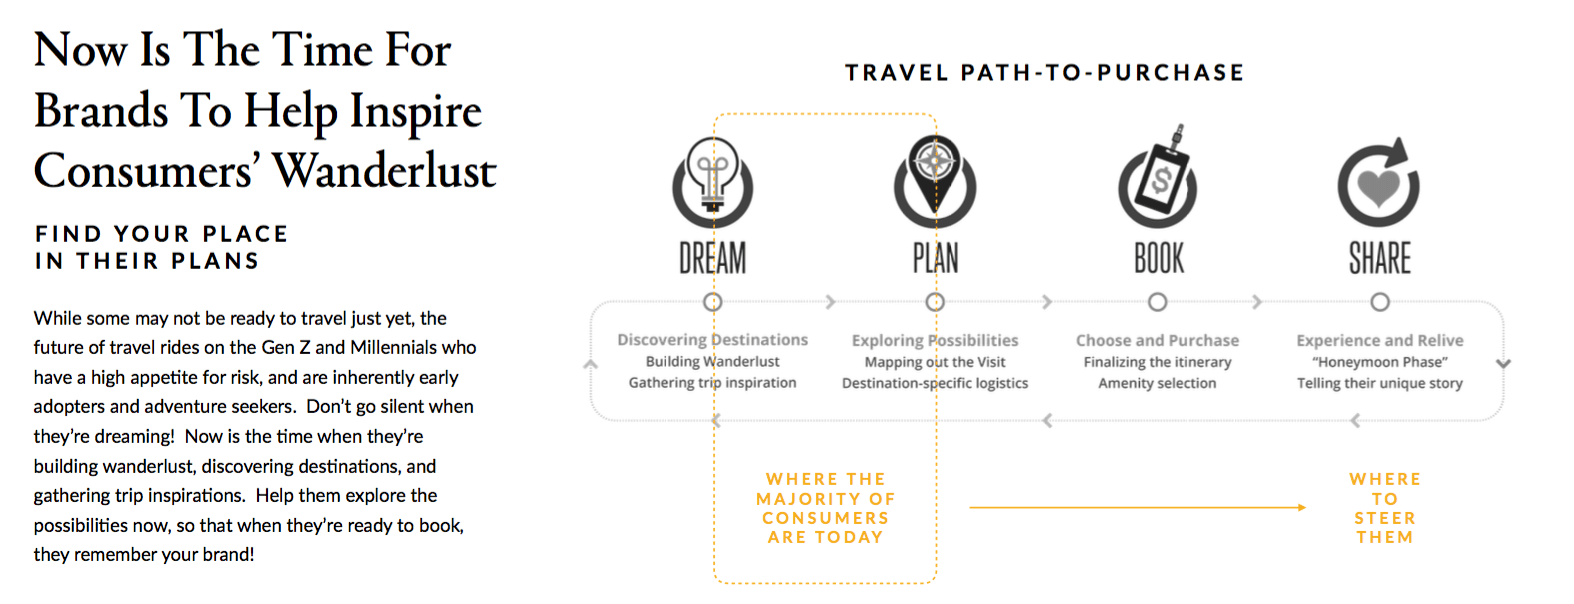 BMF releases new study, “The Road Ahead: The Return of Travel”